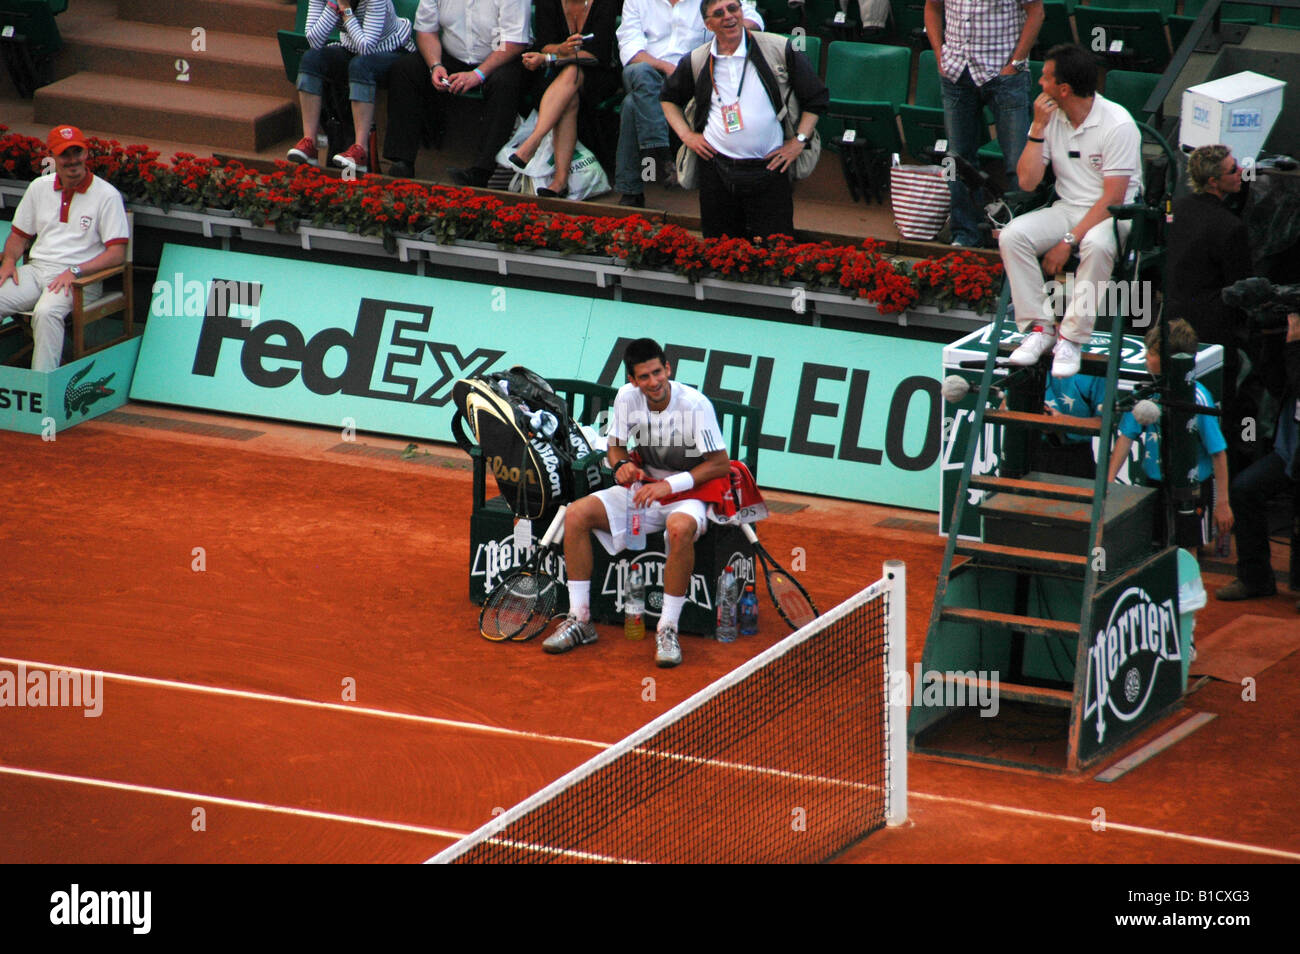 Novak Djokovic During a Change Over at Rolland Garros during the 2008 French Open Stock Photo